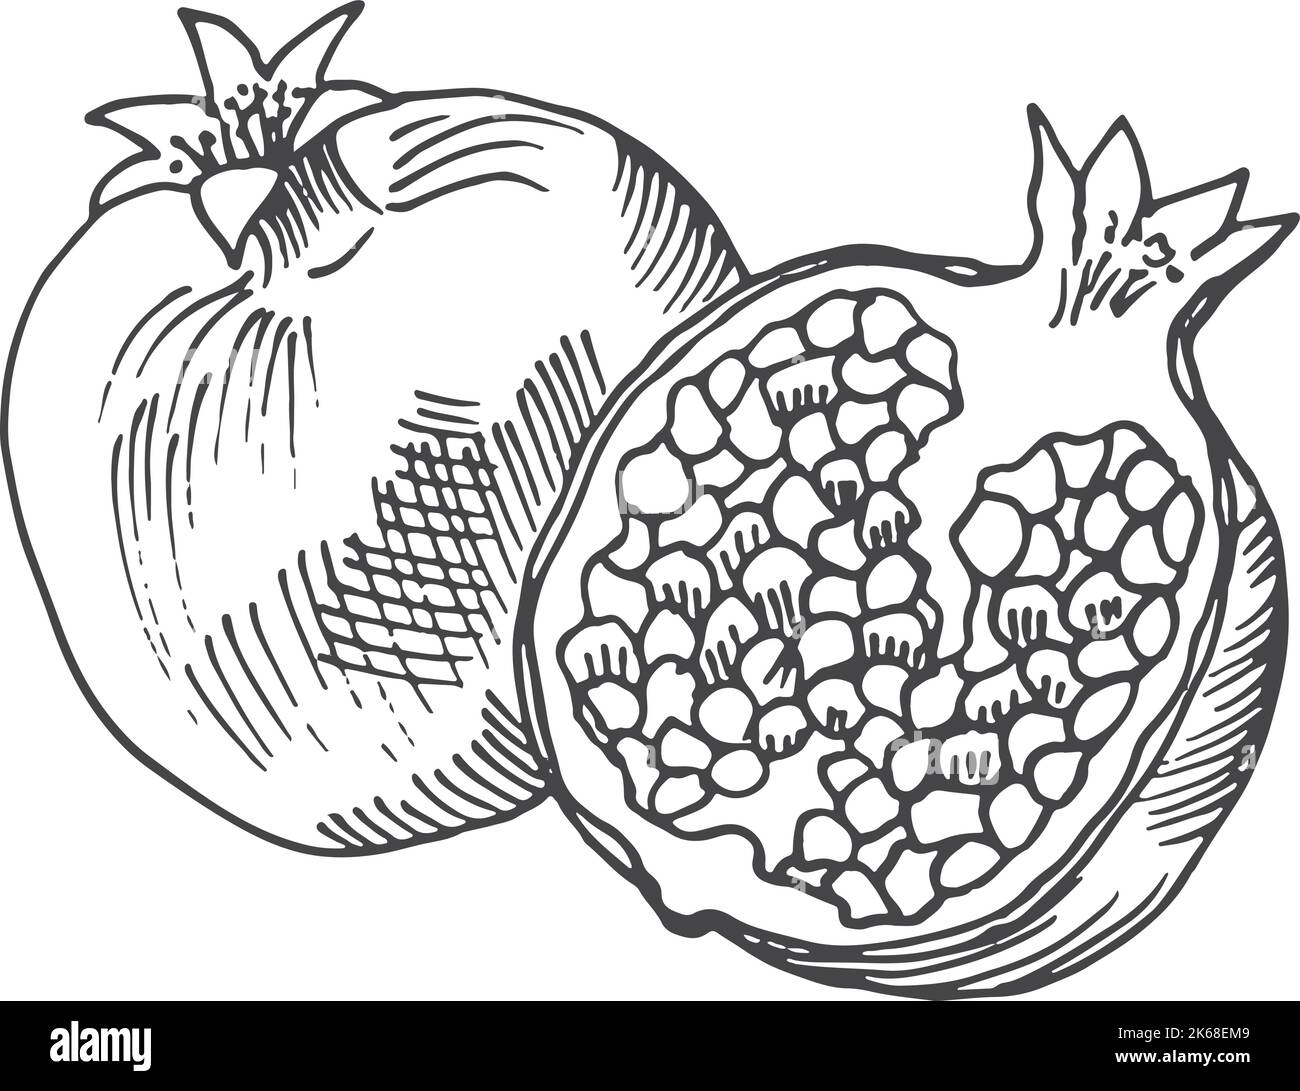 Pomegranate sketch. Whole fruit and half cut in hand drawn style Stock Vector